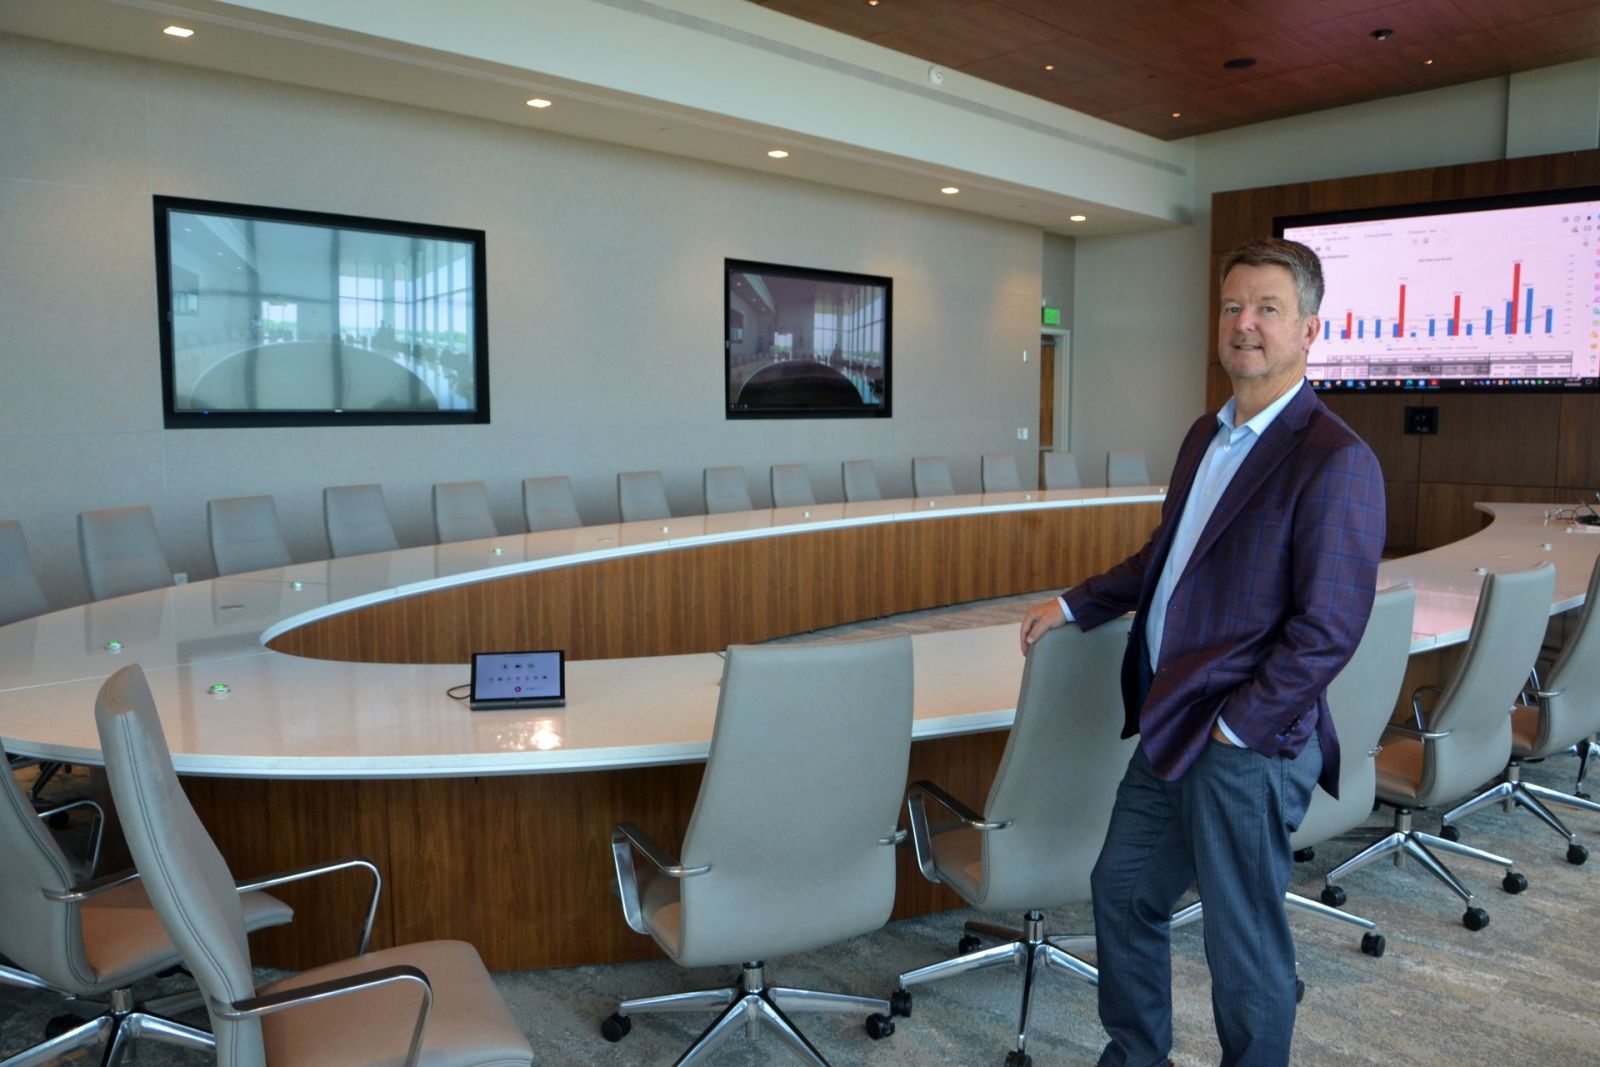 Southern First CEO Art Seaver checks out the bank‰Ûªs new board room, which came together just hours before the first directors‰Ûª meeting in the new building. (Photo/Ross Norton)